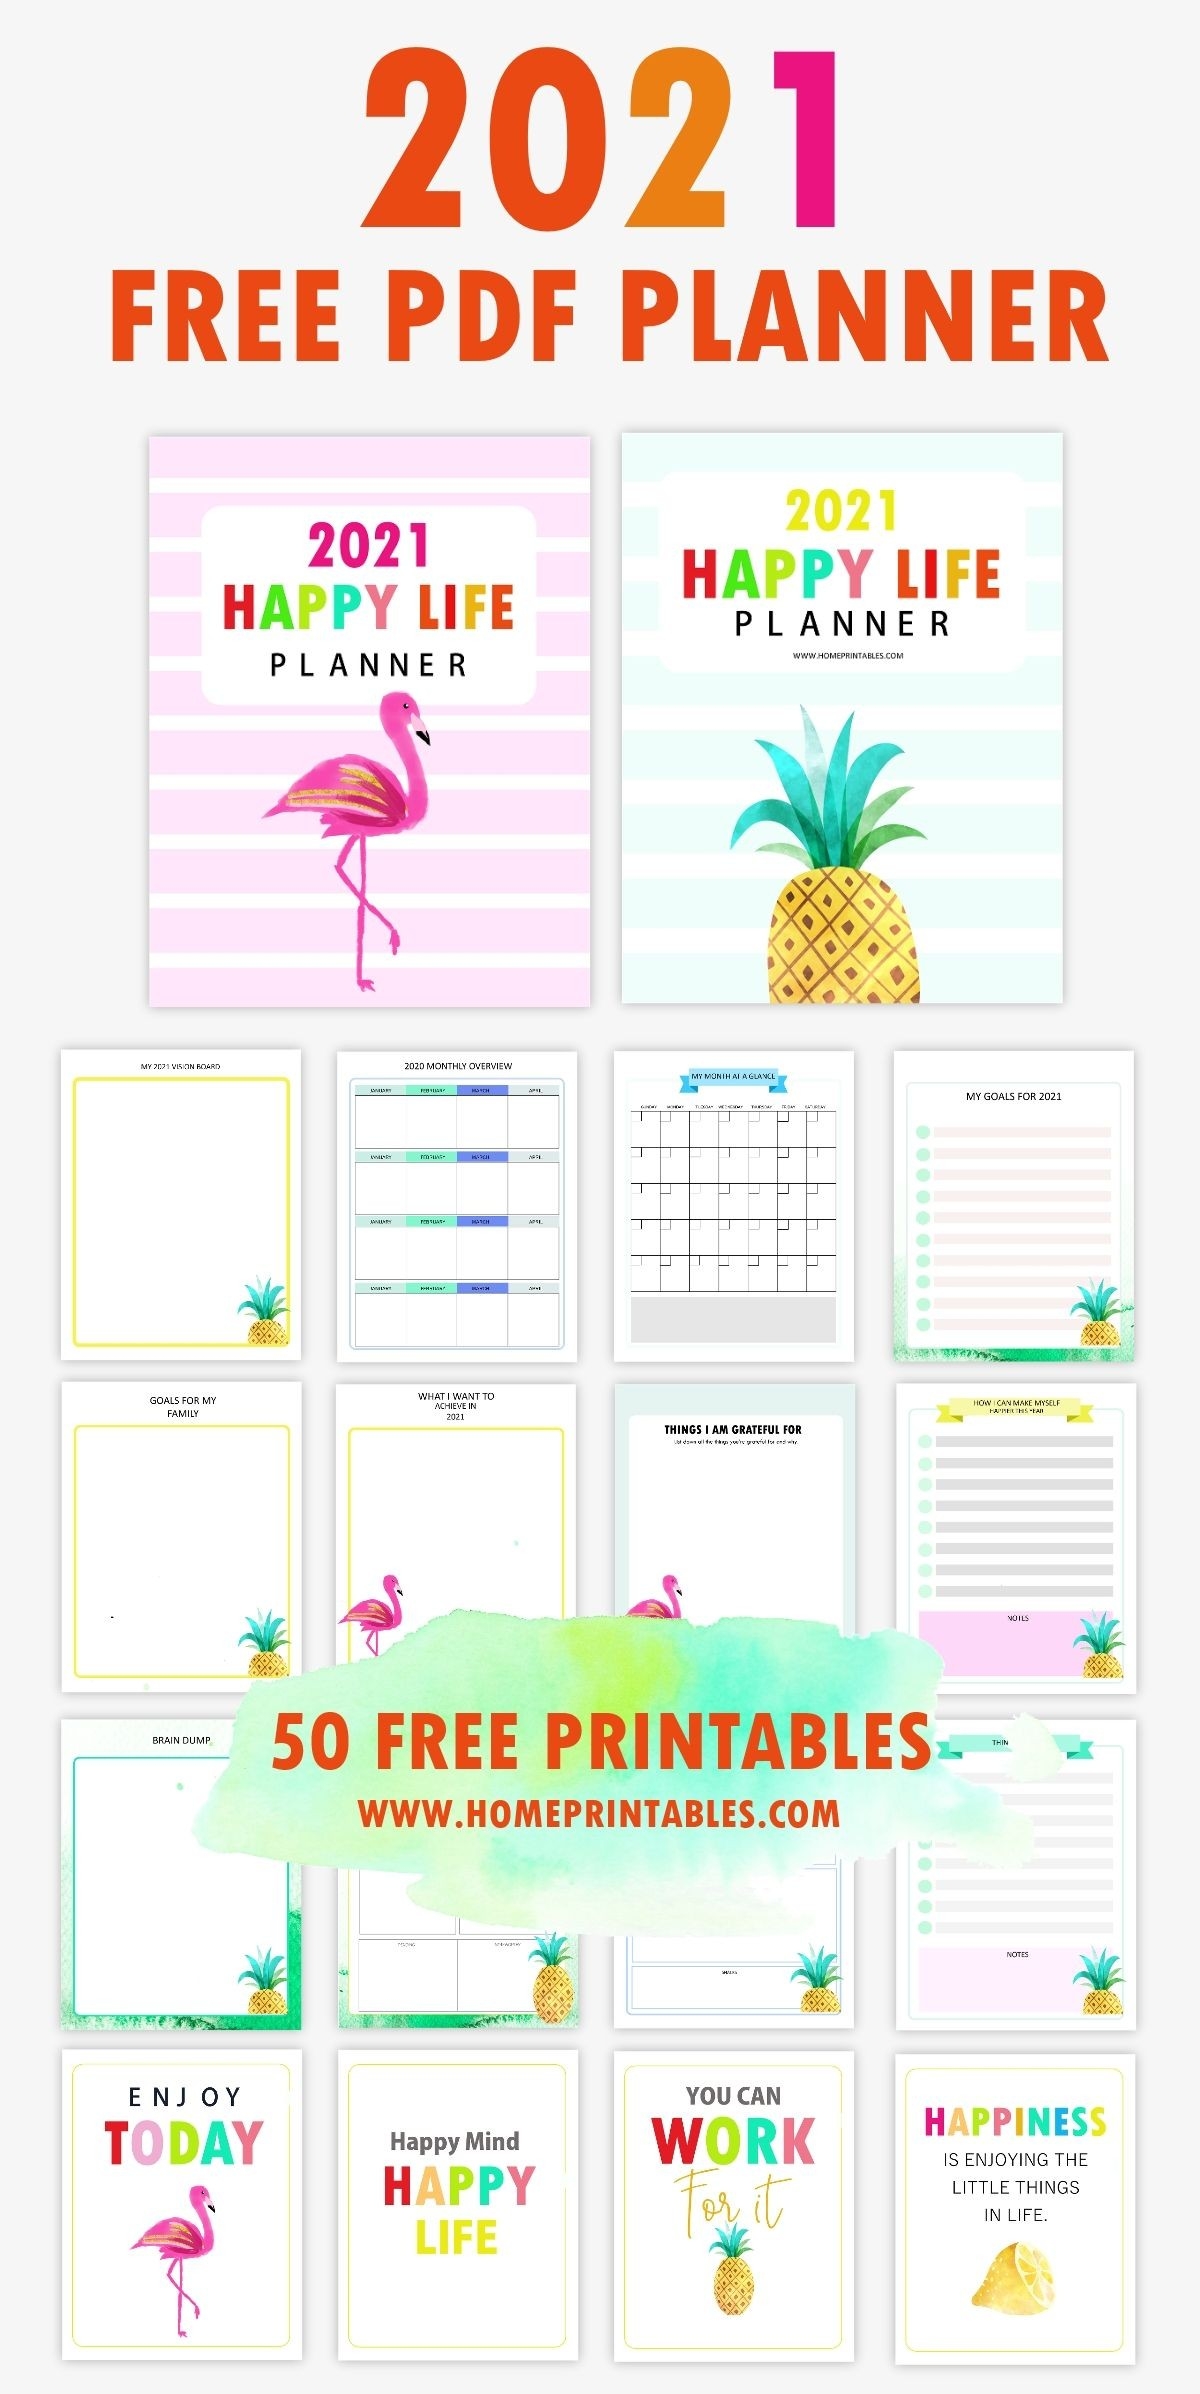 Free Printable Planner 2021 Pdf: 50 Best Organizers For A-Free Printable 2021 Happy Planner